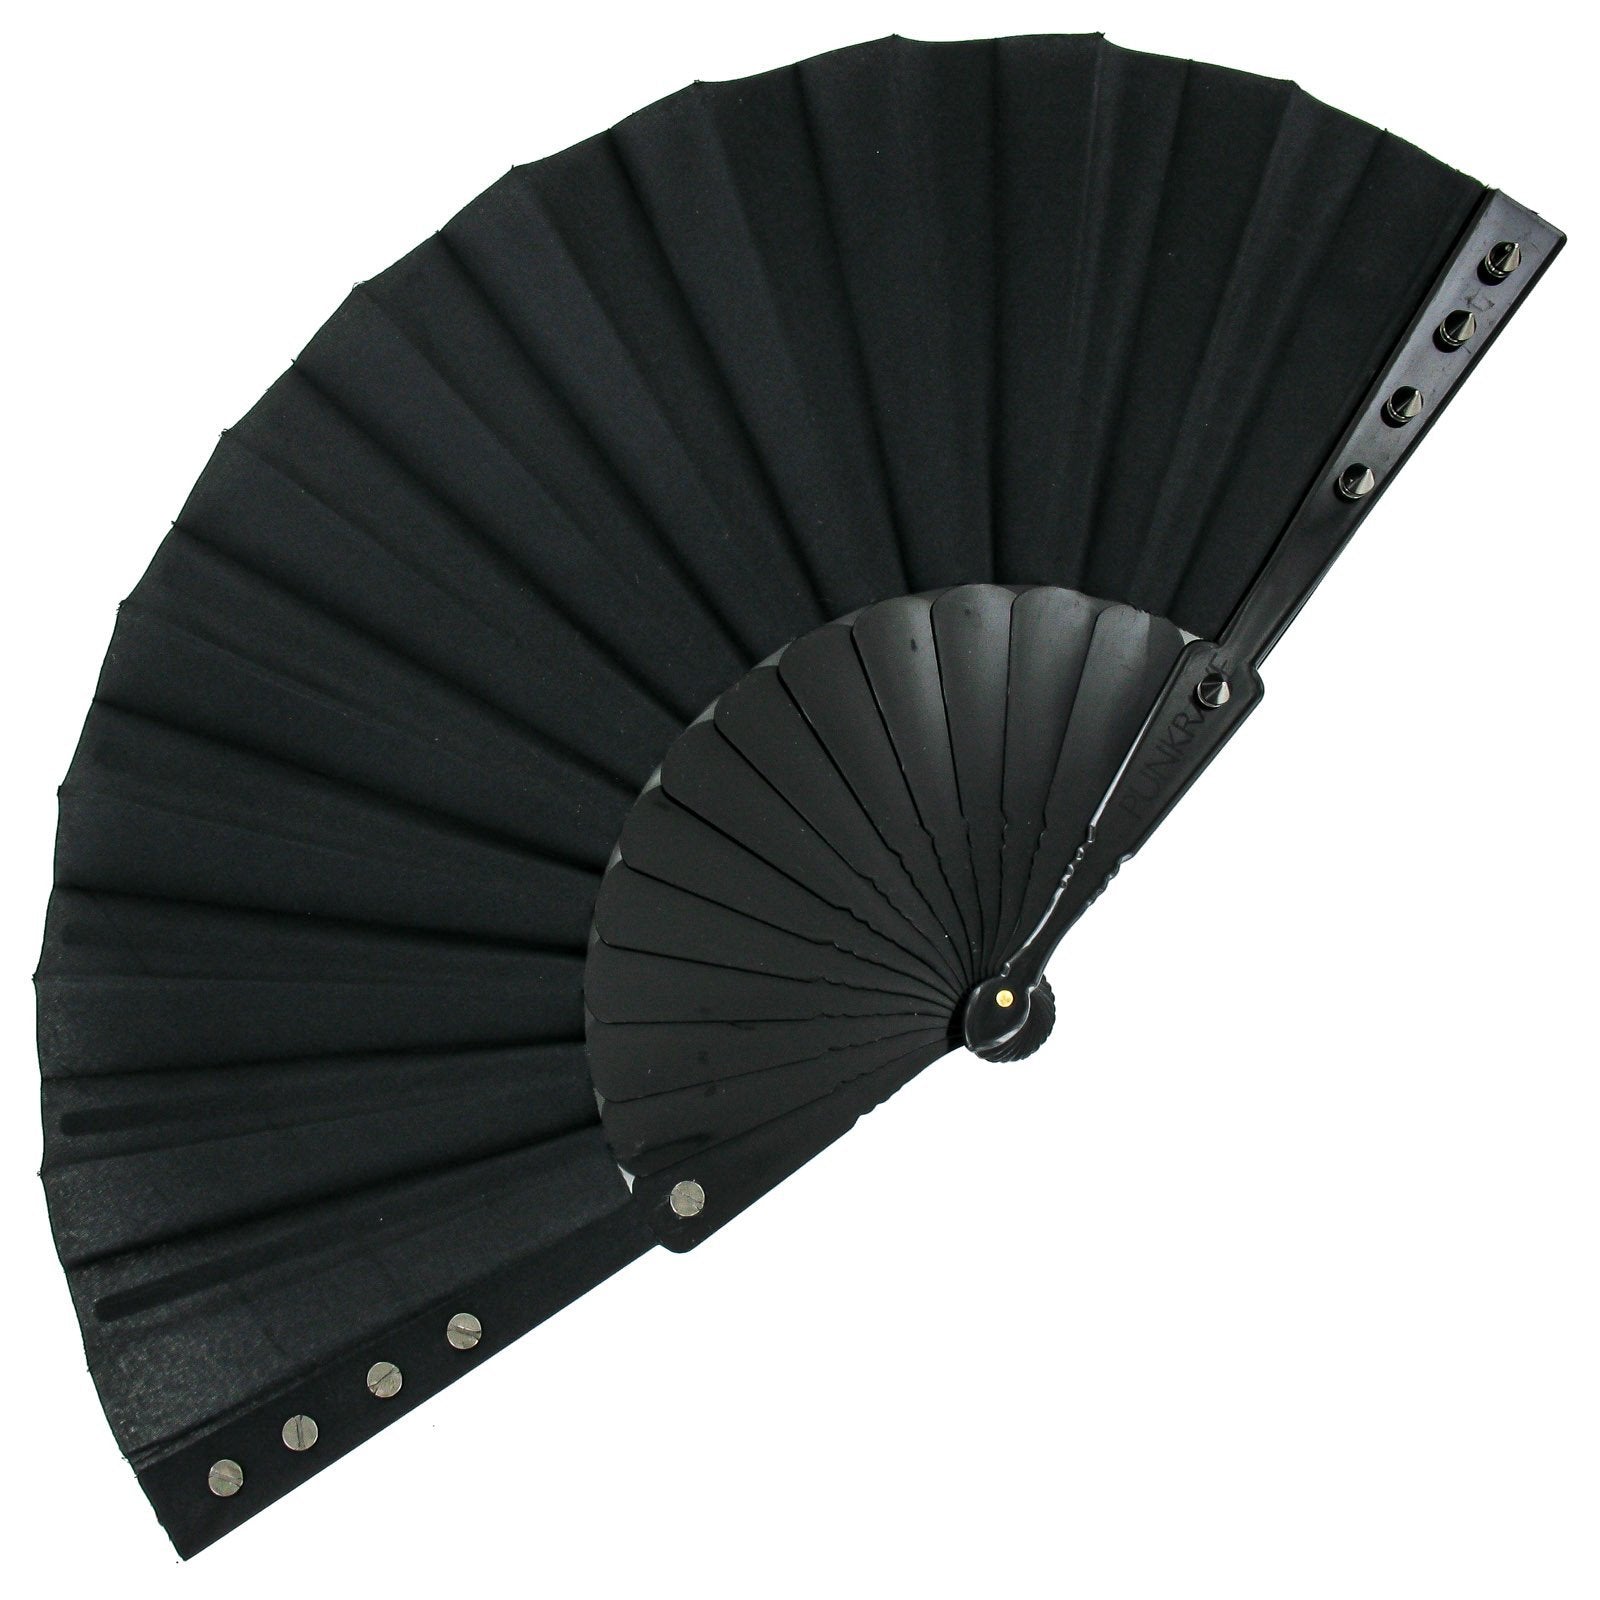 Fan with spikes, fetish goth accessory, black